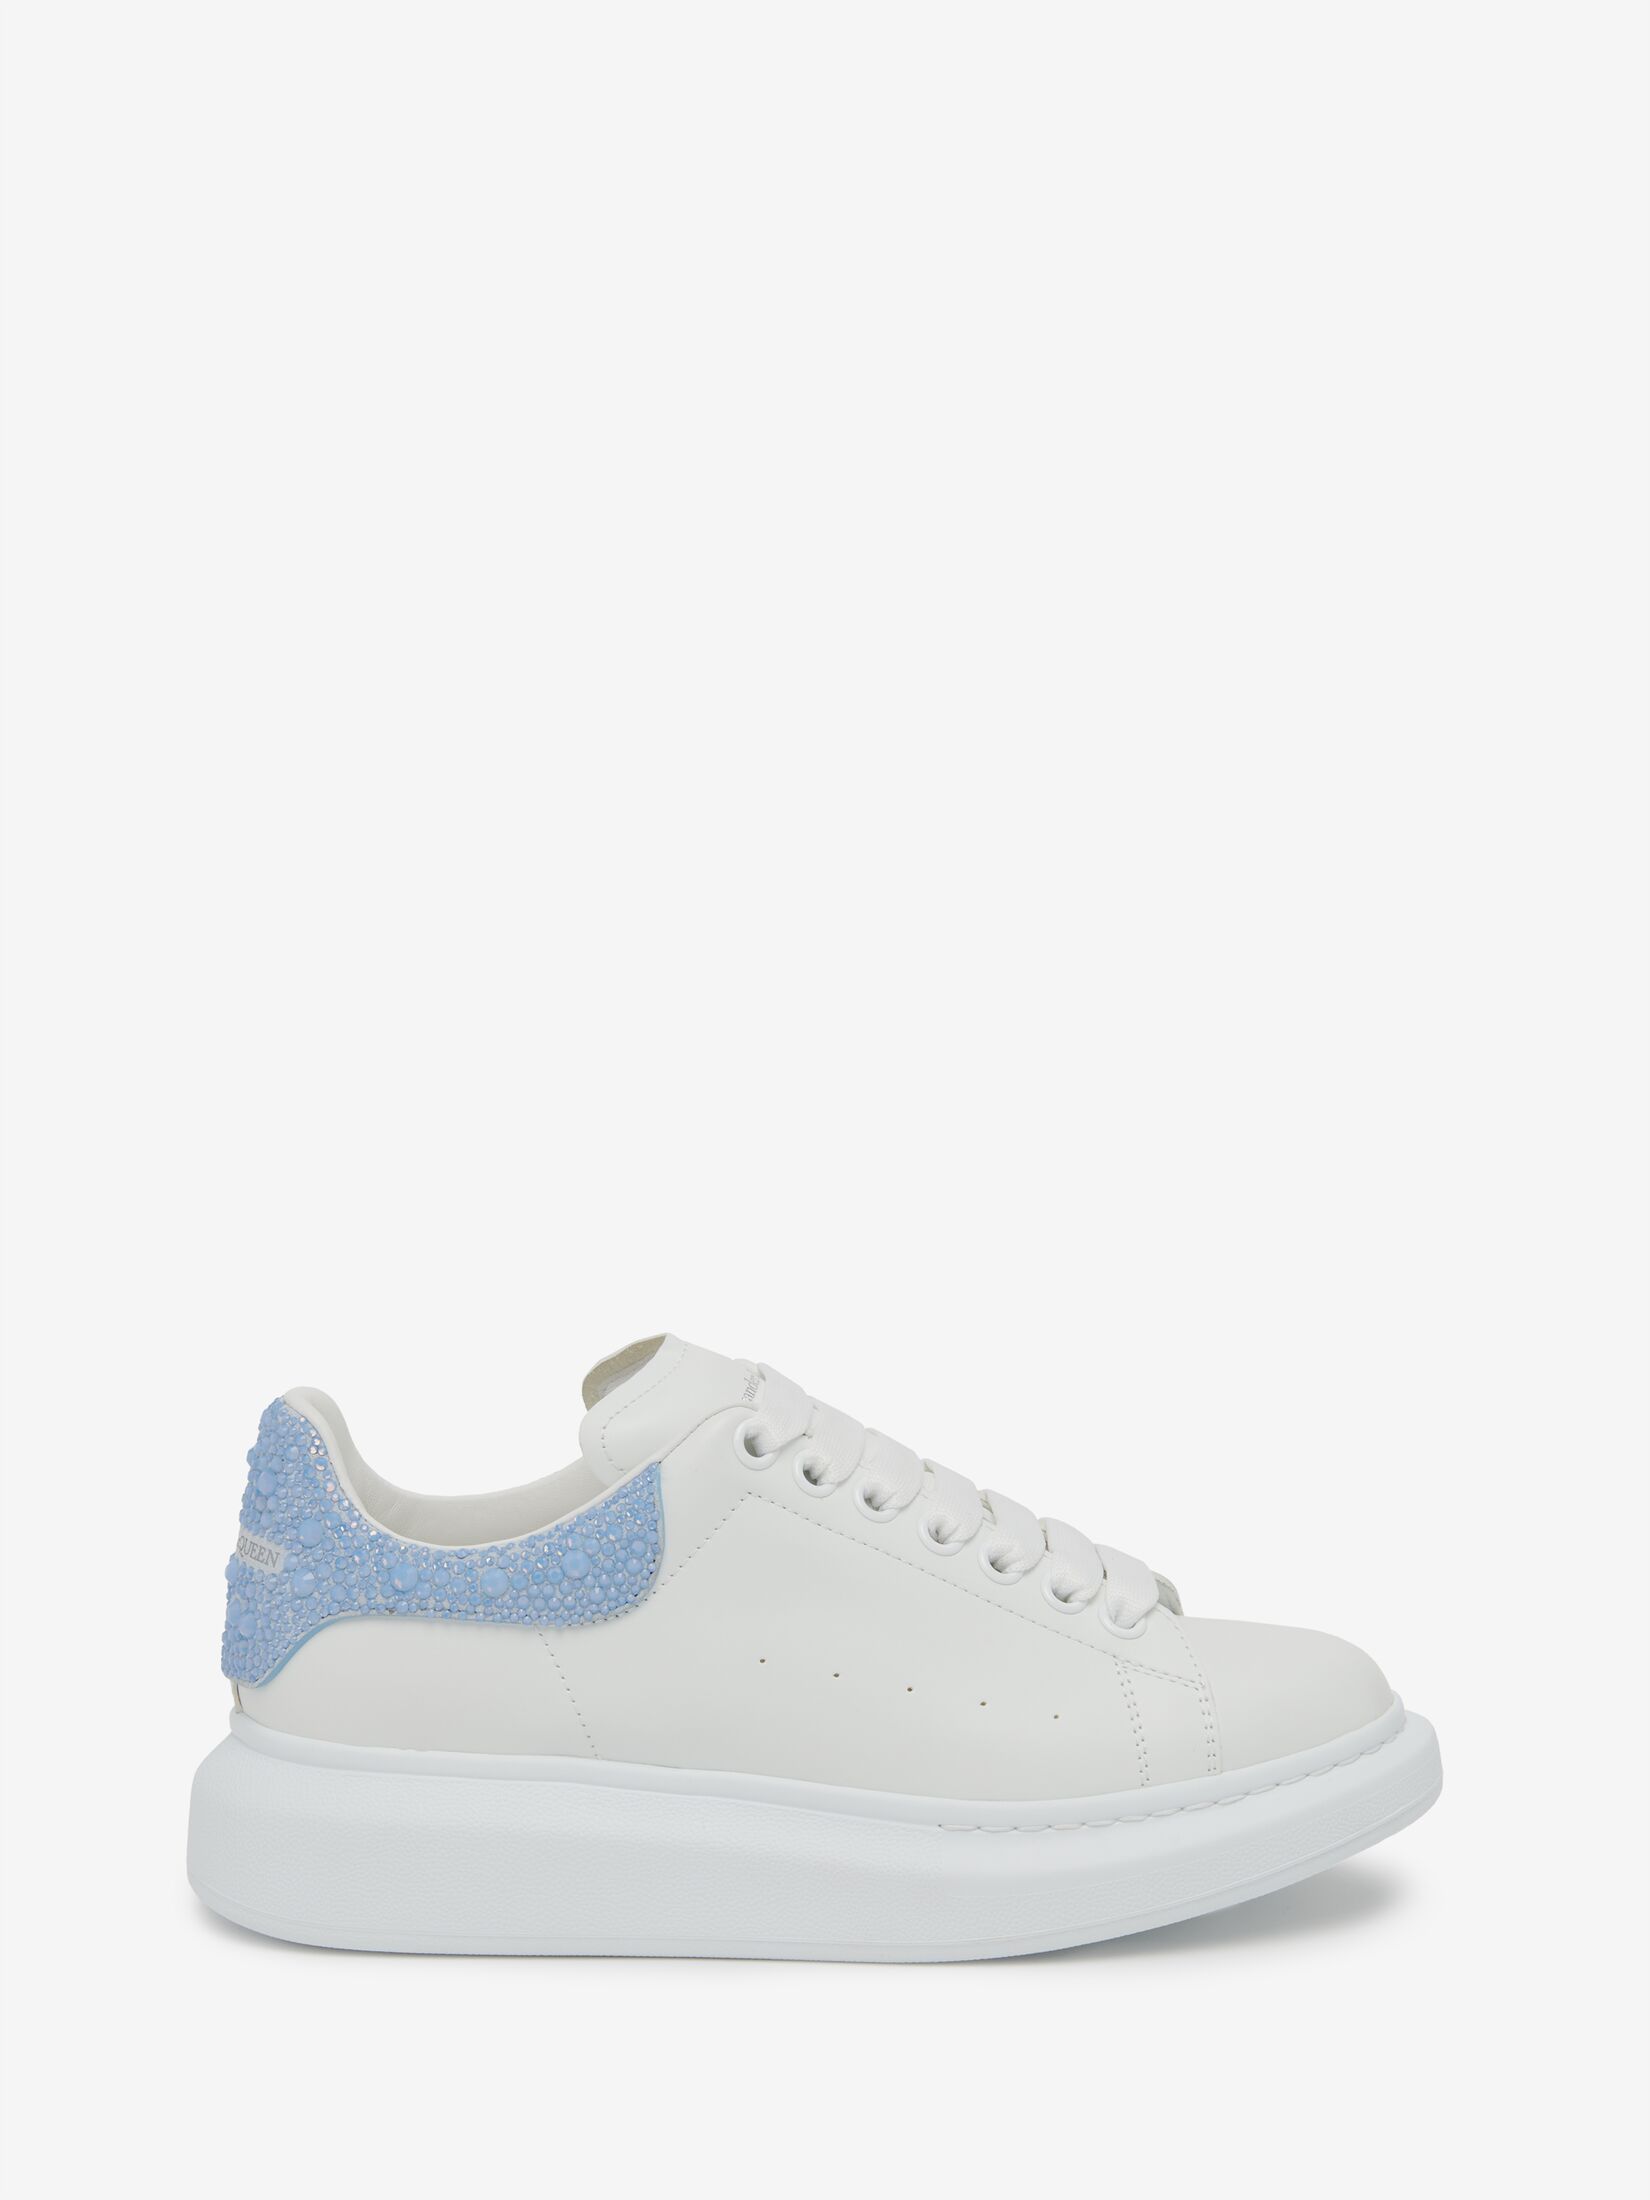 Alexander McQueen White/Red Joey Larry Sneakers | Sneakers, Alexander  mcqueen shoes sneakers, Womens shoes sneakers